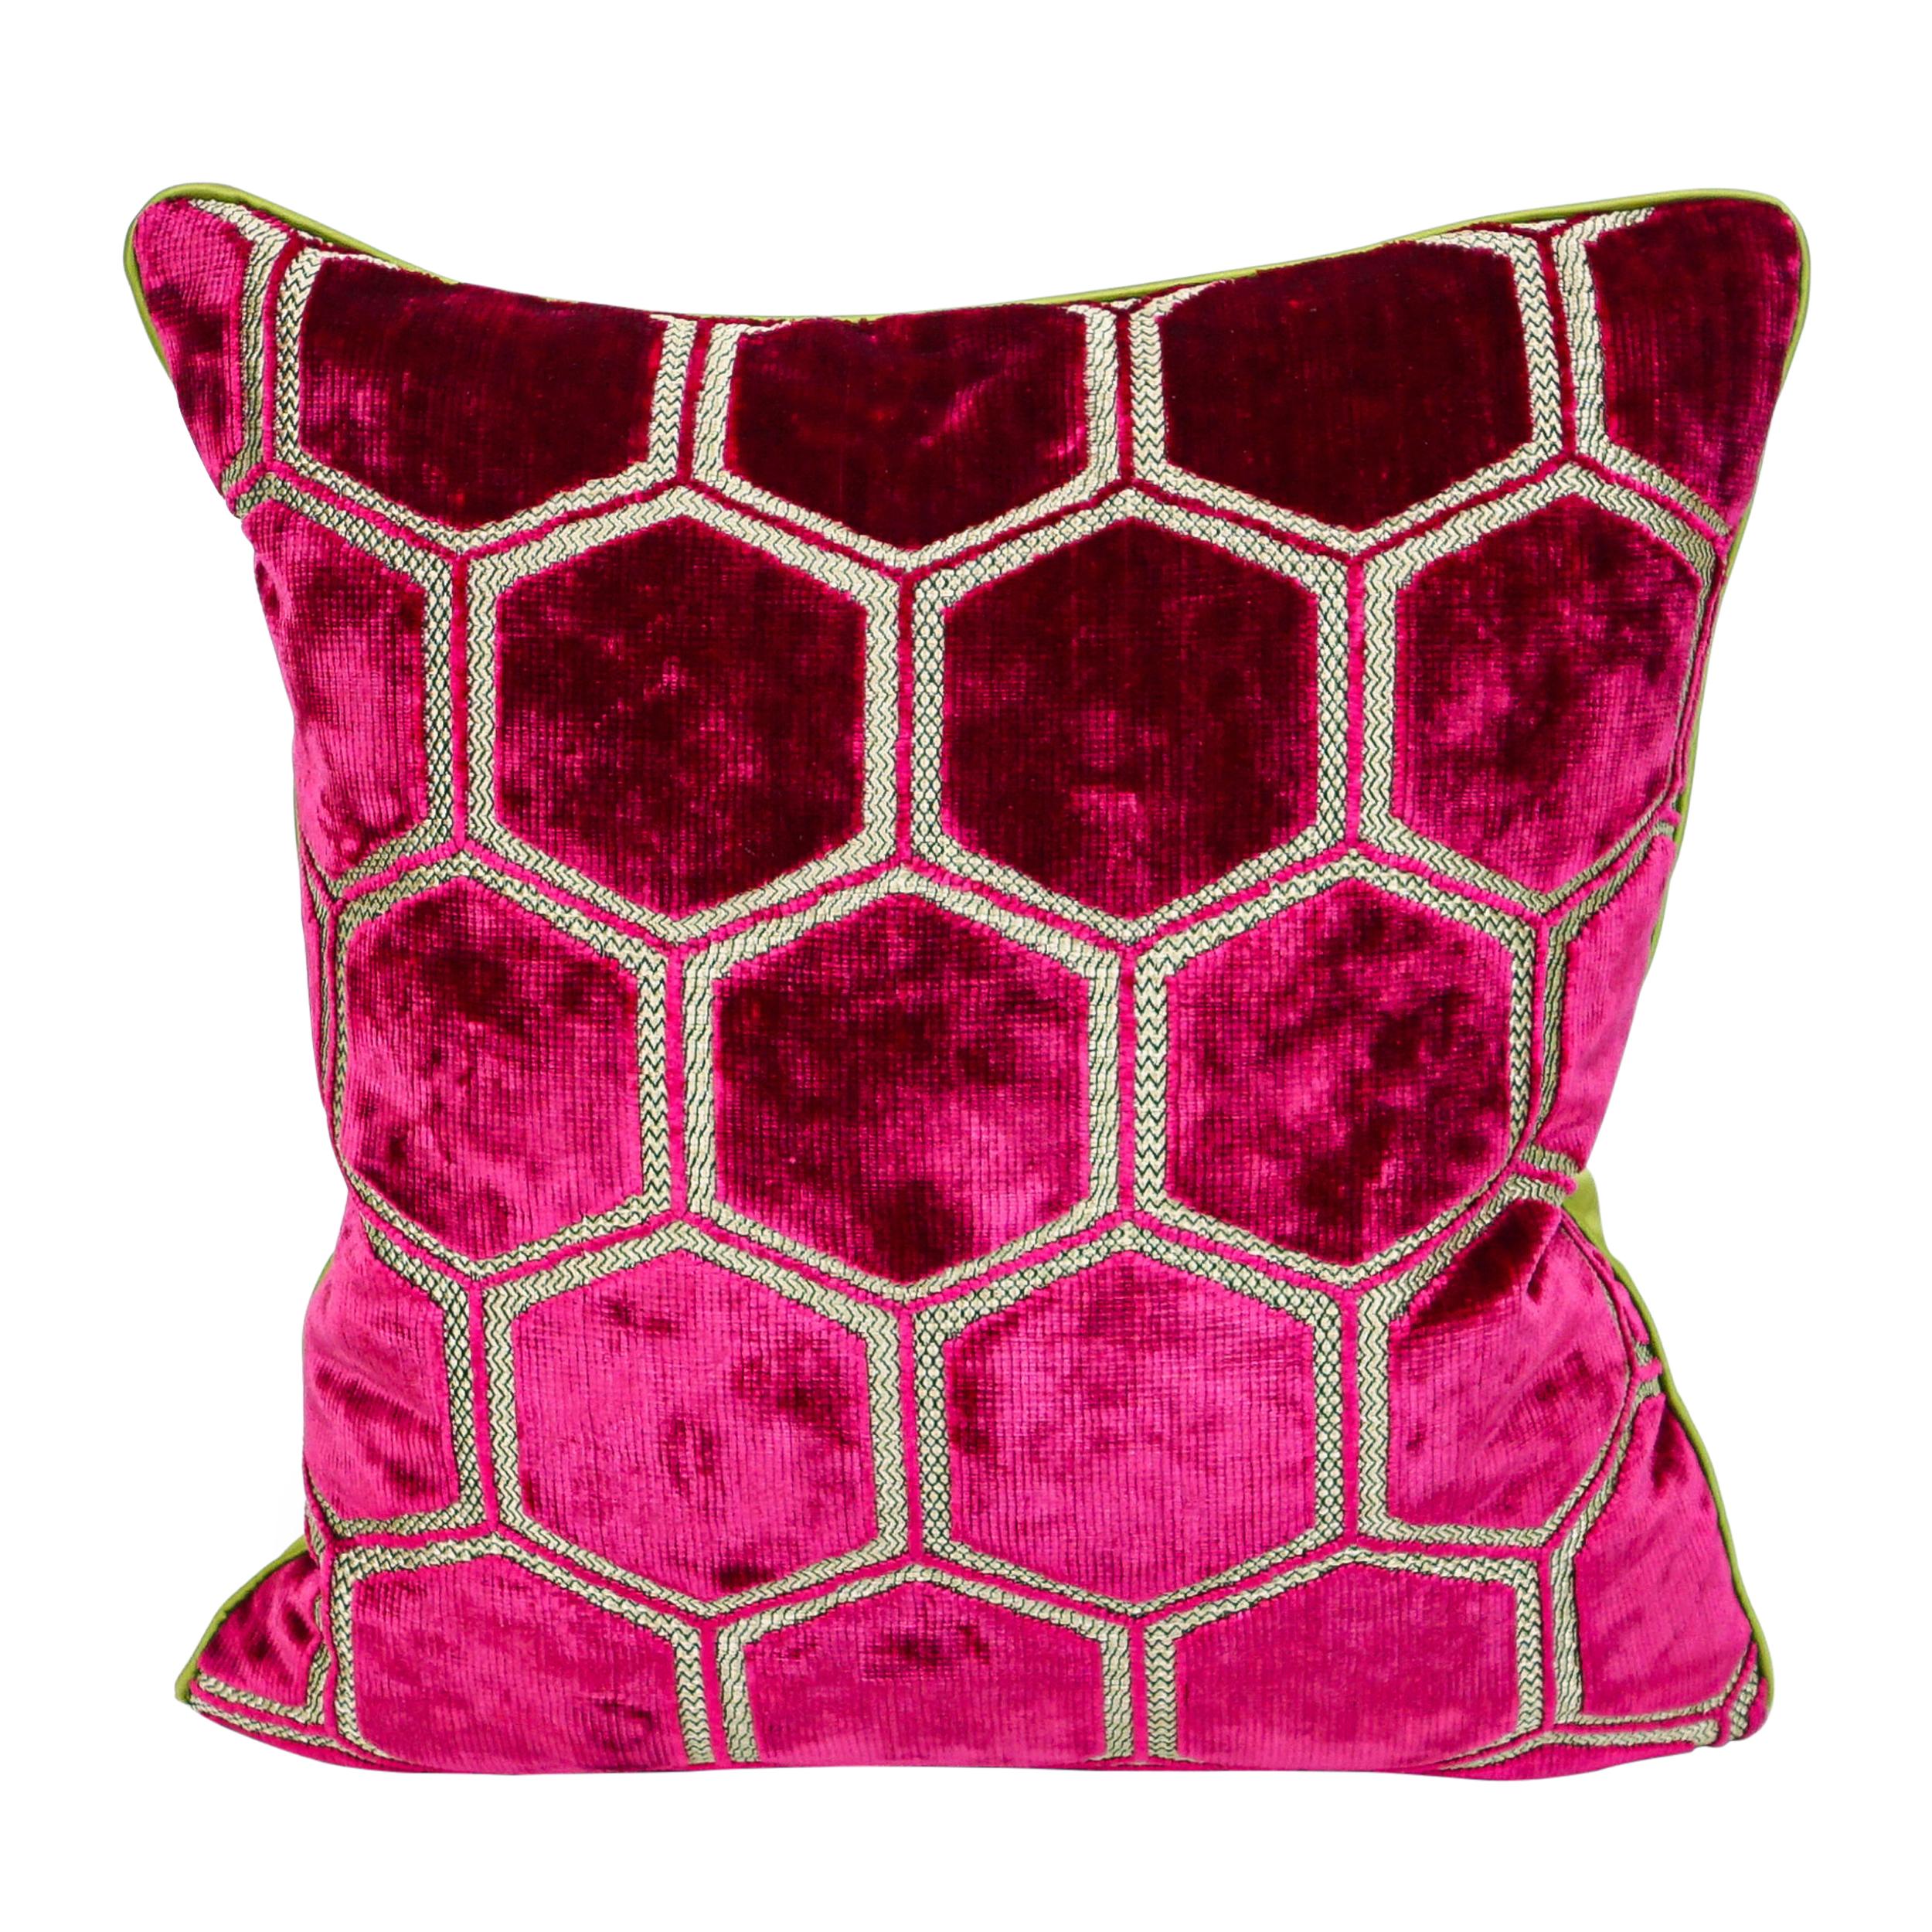 Fuchsia Hexagonal Cut Velvet Square Pillows with Chartreuse Sateen Back For Sale 2